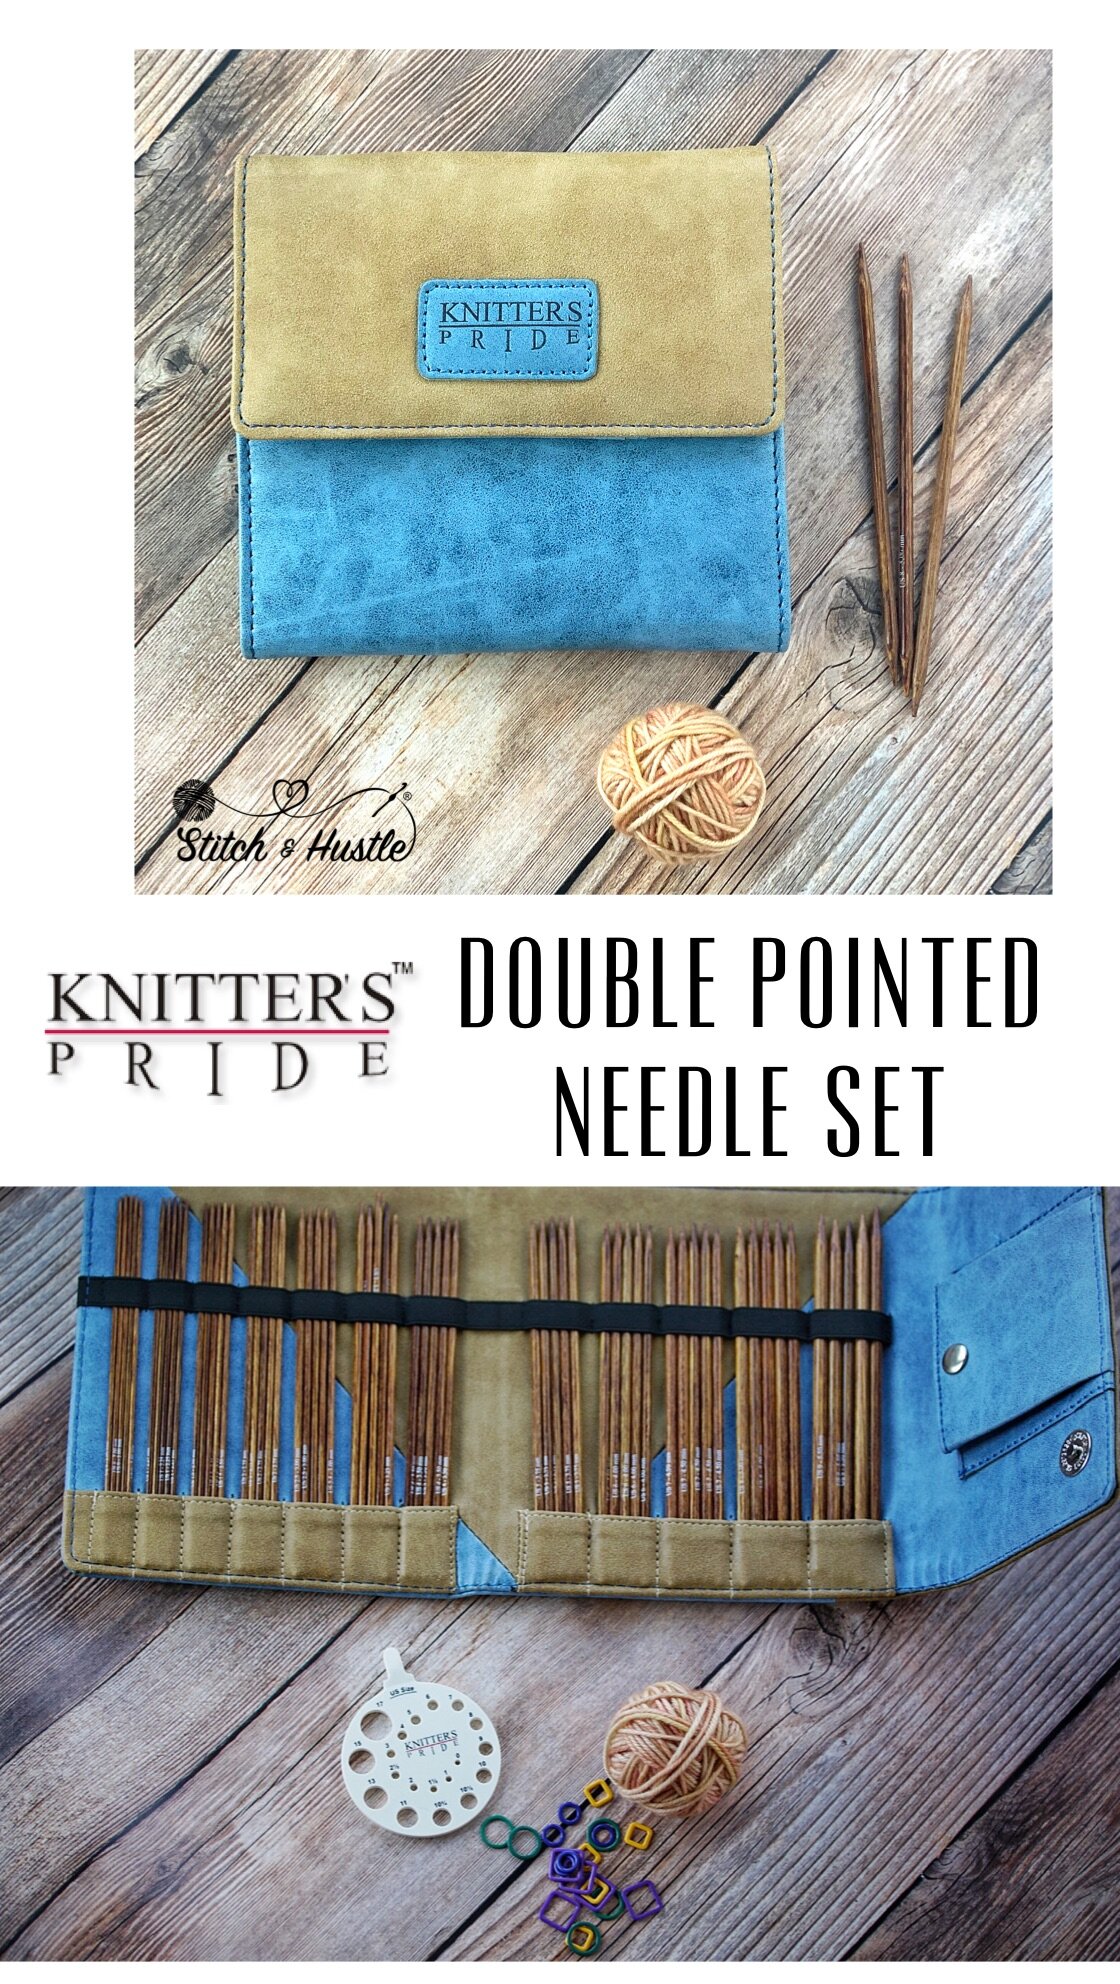 Knitter's Pride Ginger Interchangeable Knitting Needles – A Review